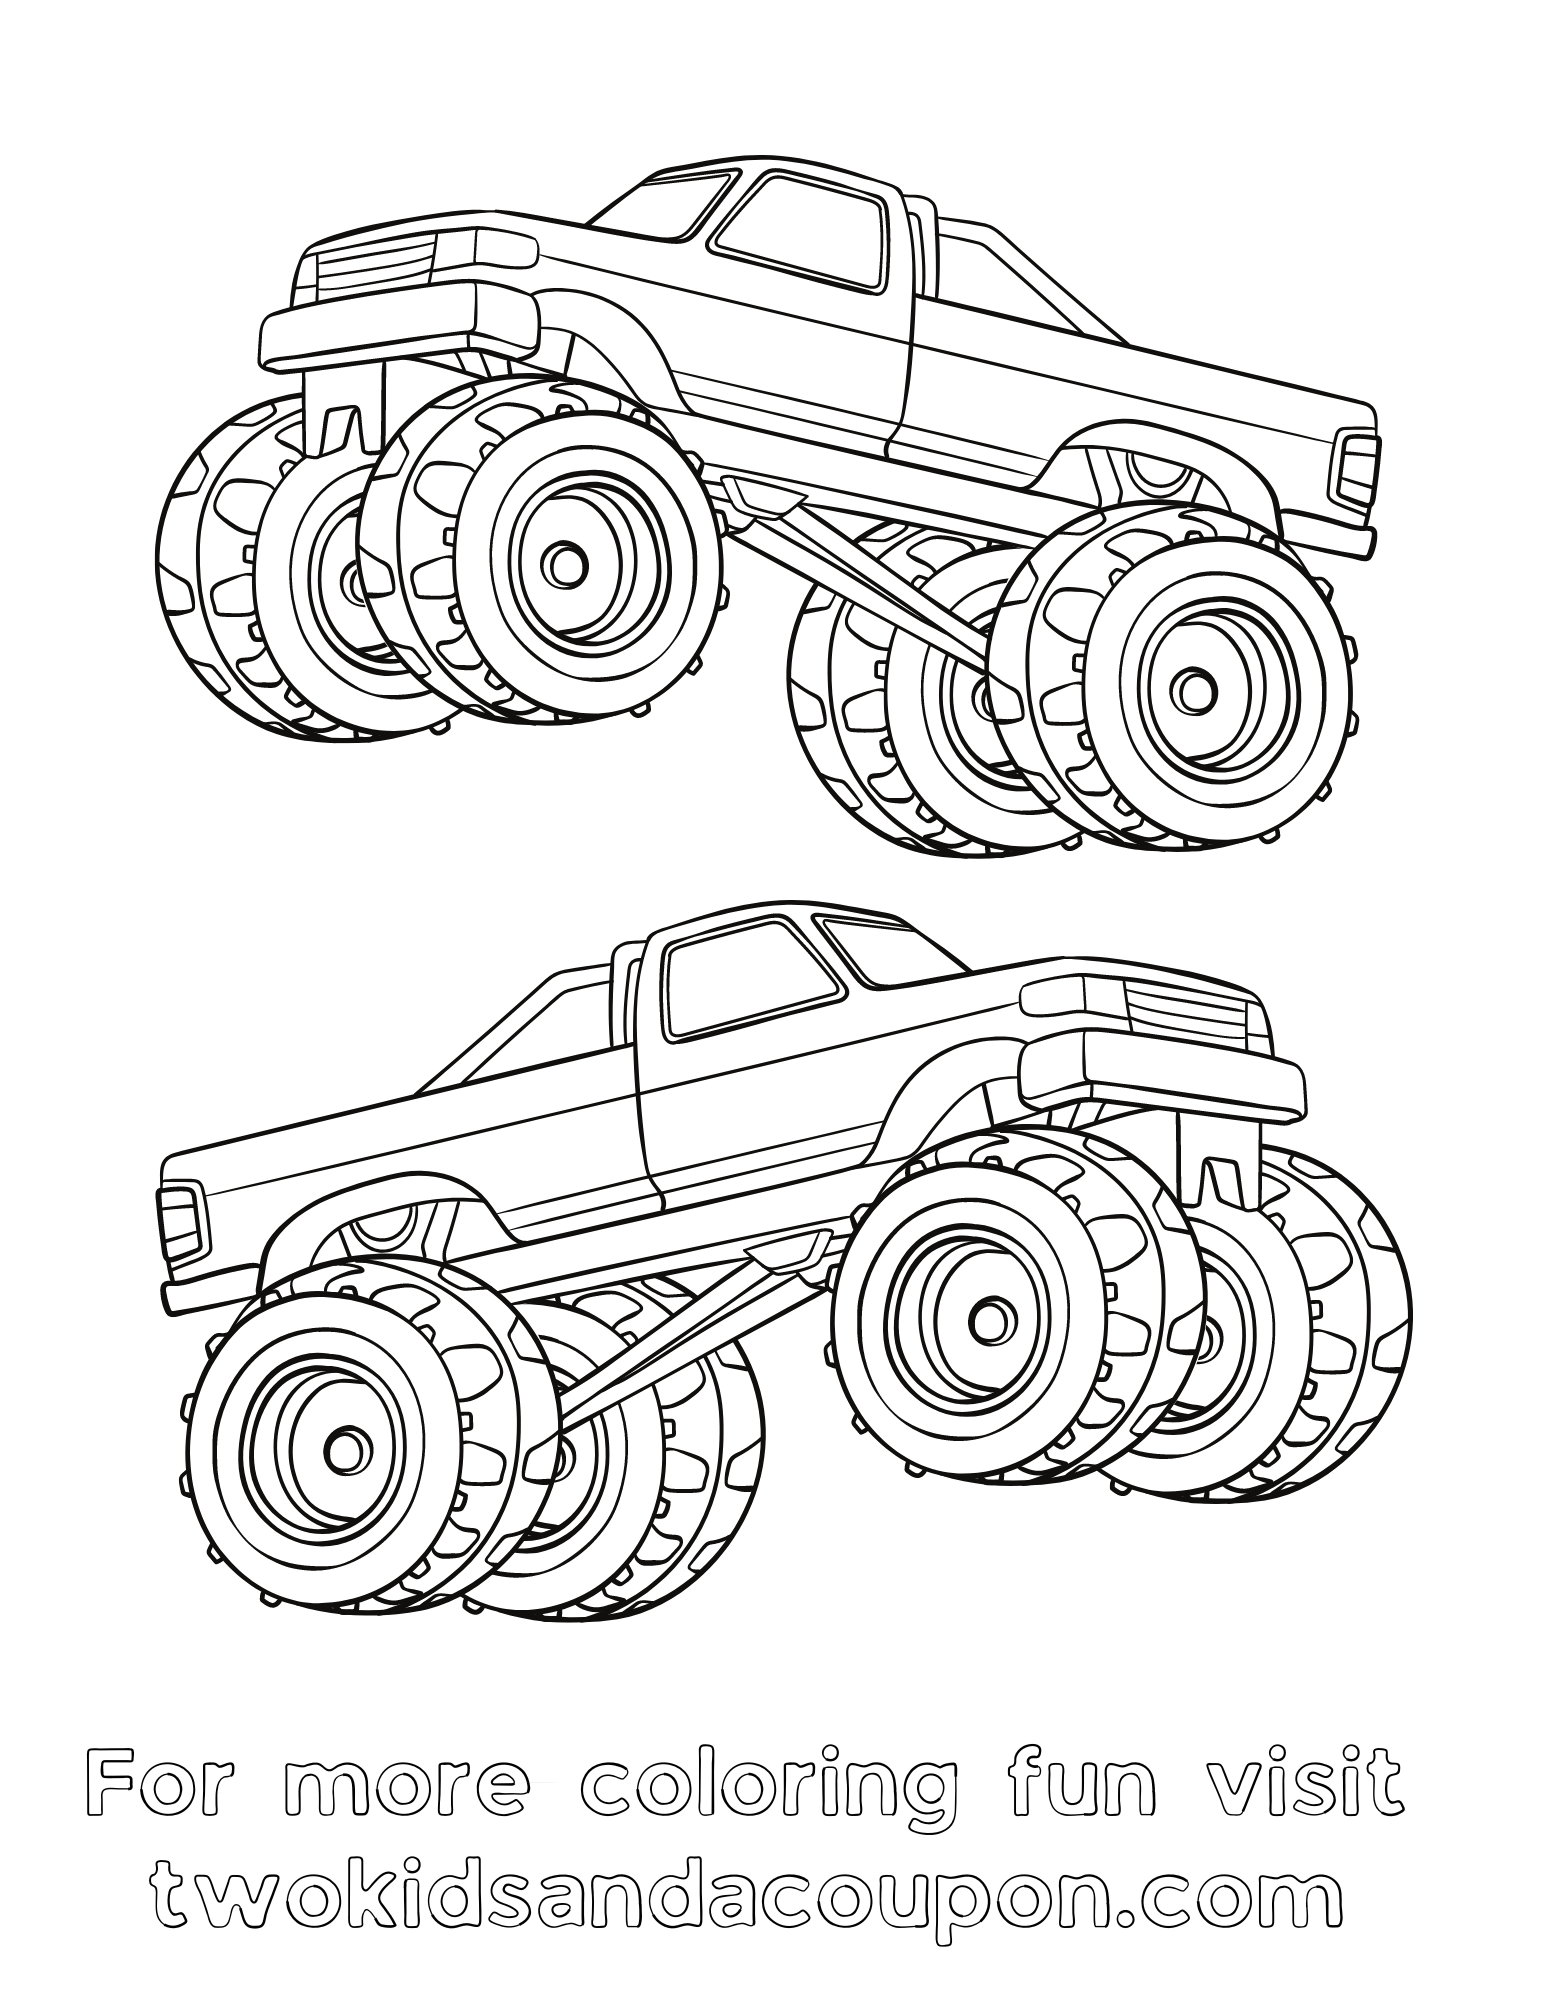 Print big fun with these free monster truck coloring pages